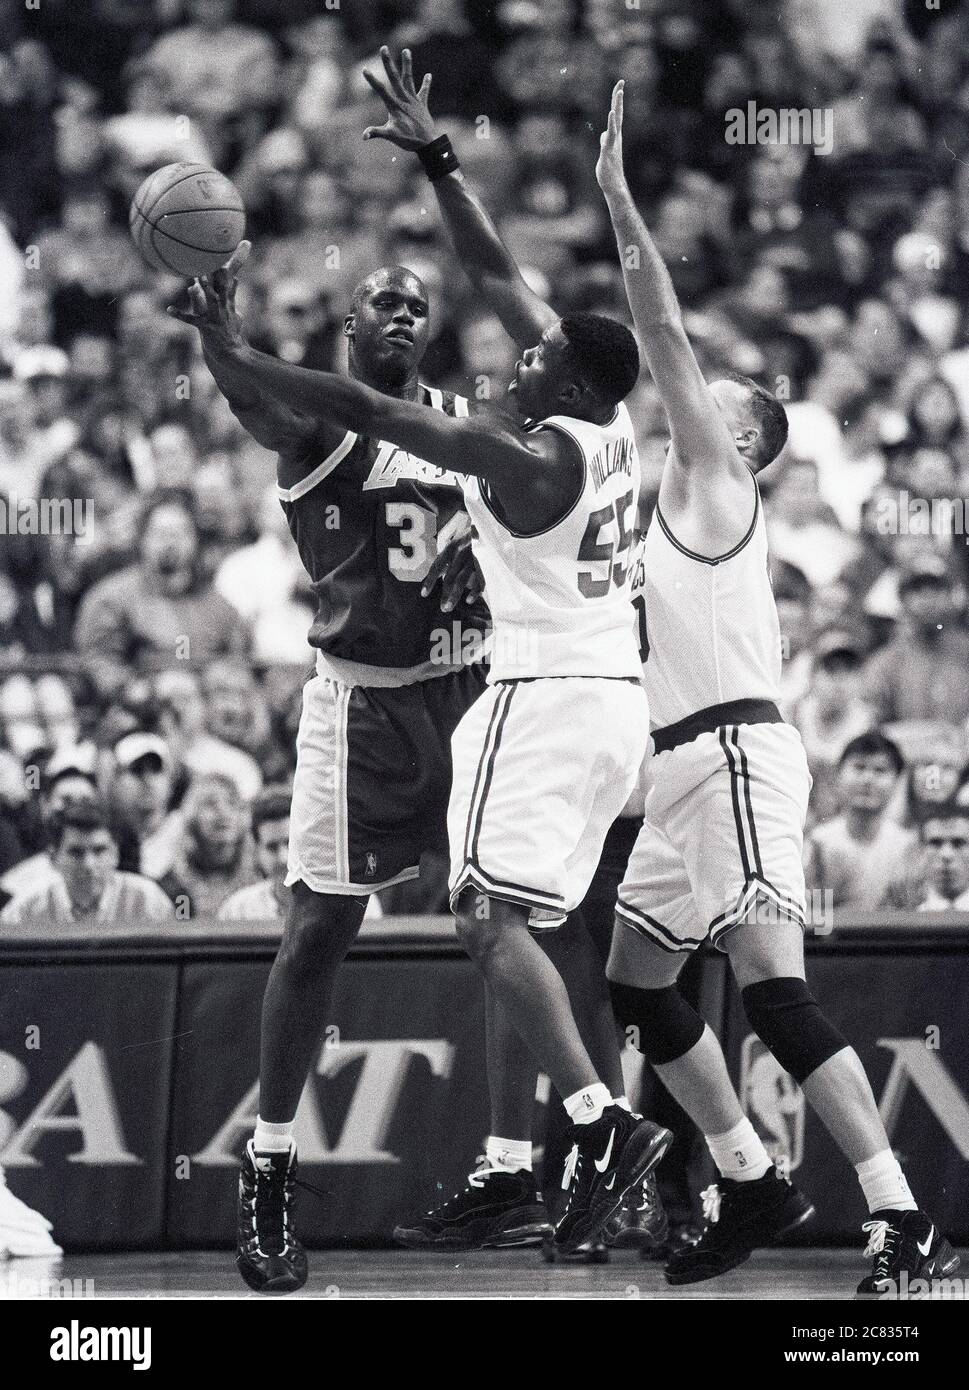 LA Lakers Shaquille O’Neal  (left) passes off the ball against defending Boston Celtics Eric Williams #55 (center) and Dino Radja #40 (right) in game action  at the Fleet Center in Boston Ma USA photo by bill belknap Stock Photo